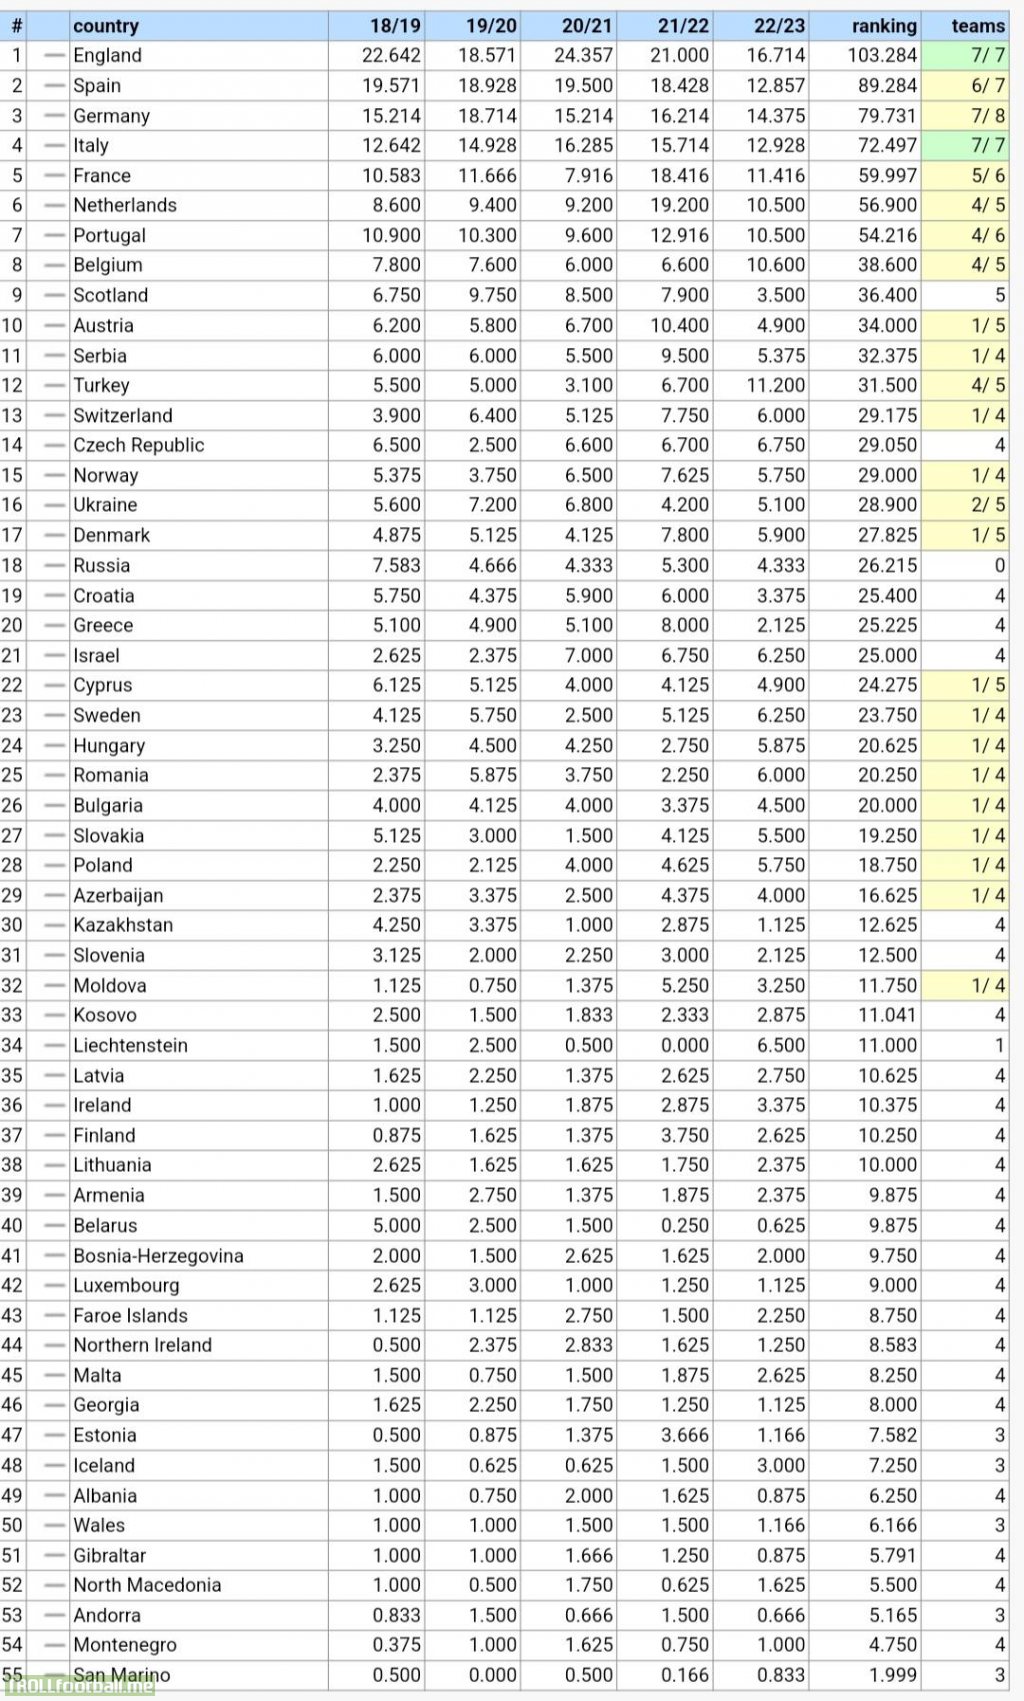 UEFA Country Coefficient after this week's games